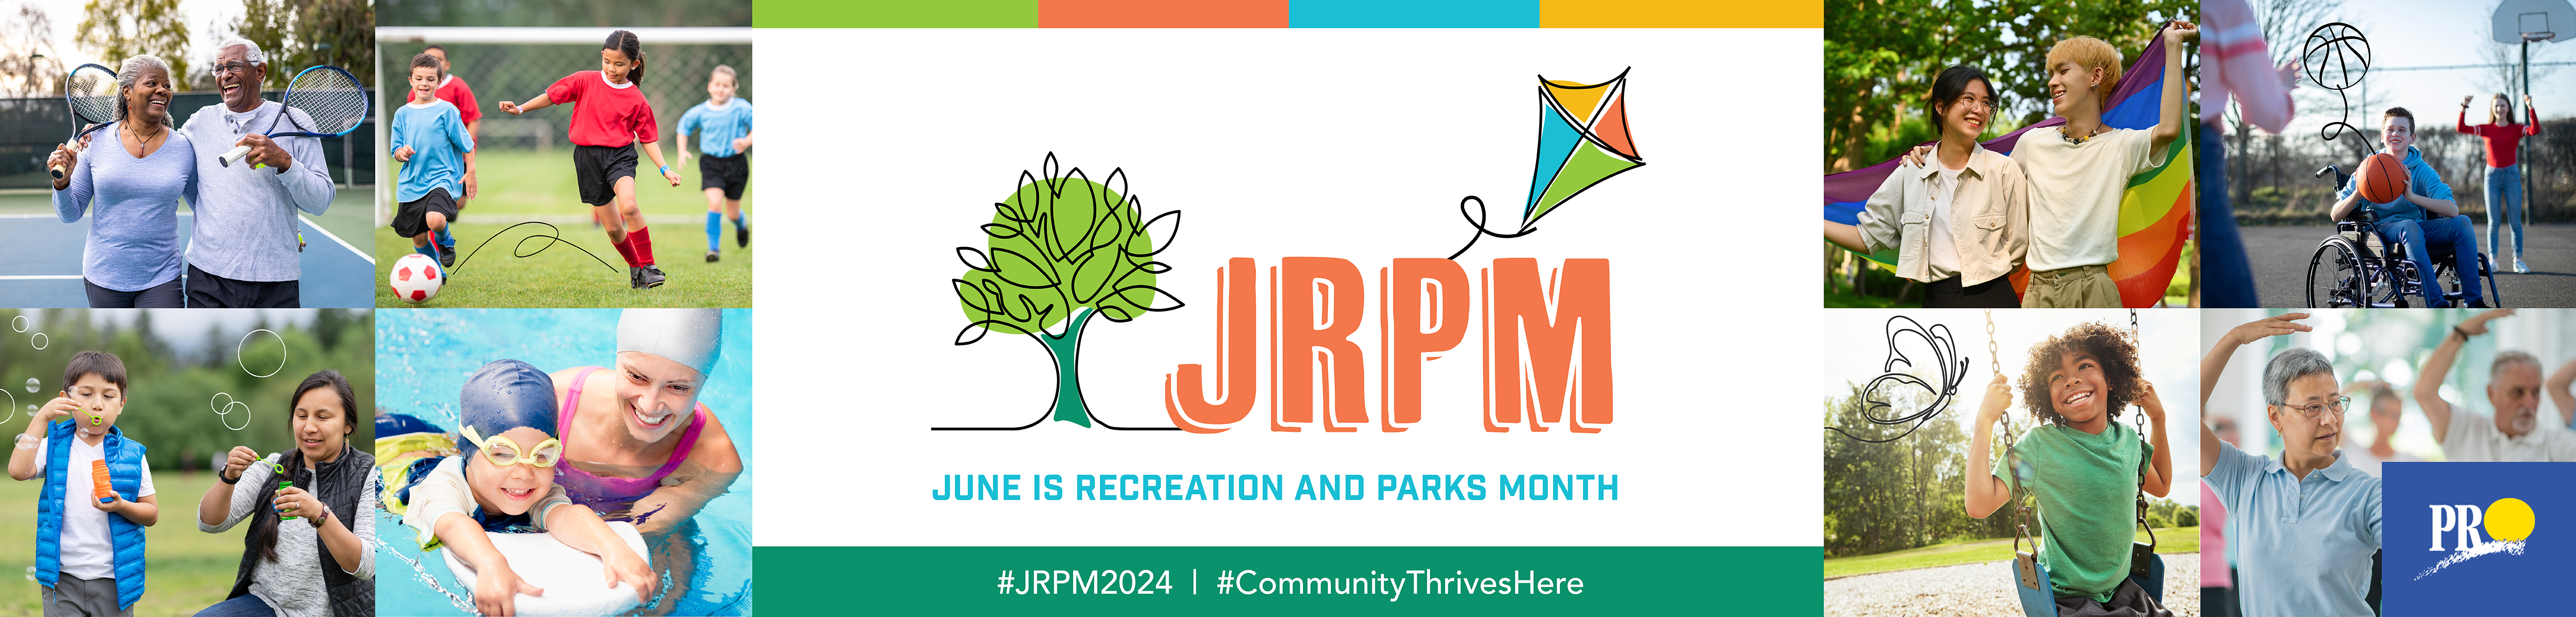 Collage of photos of people playing games and enjoying themselves in parks with the June is Recreation and Parks Month logo in the centre